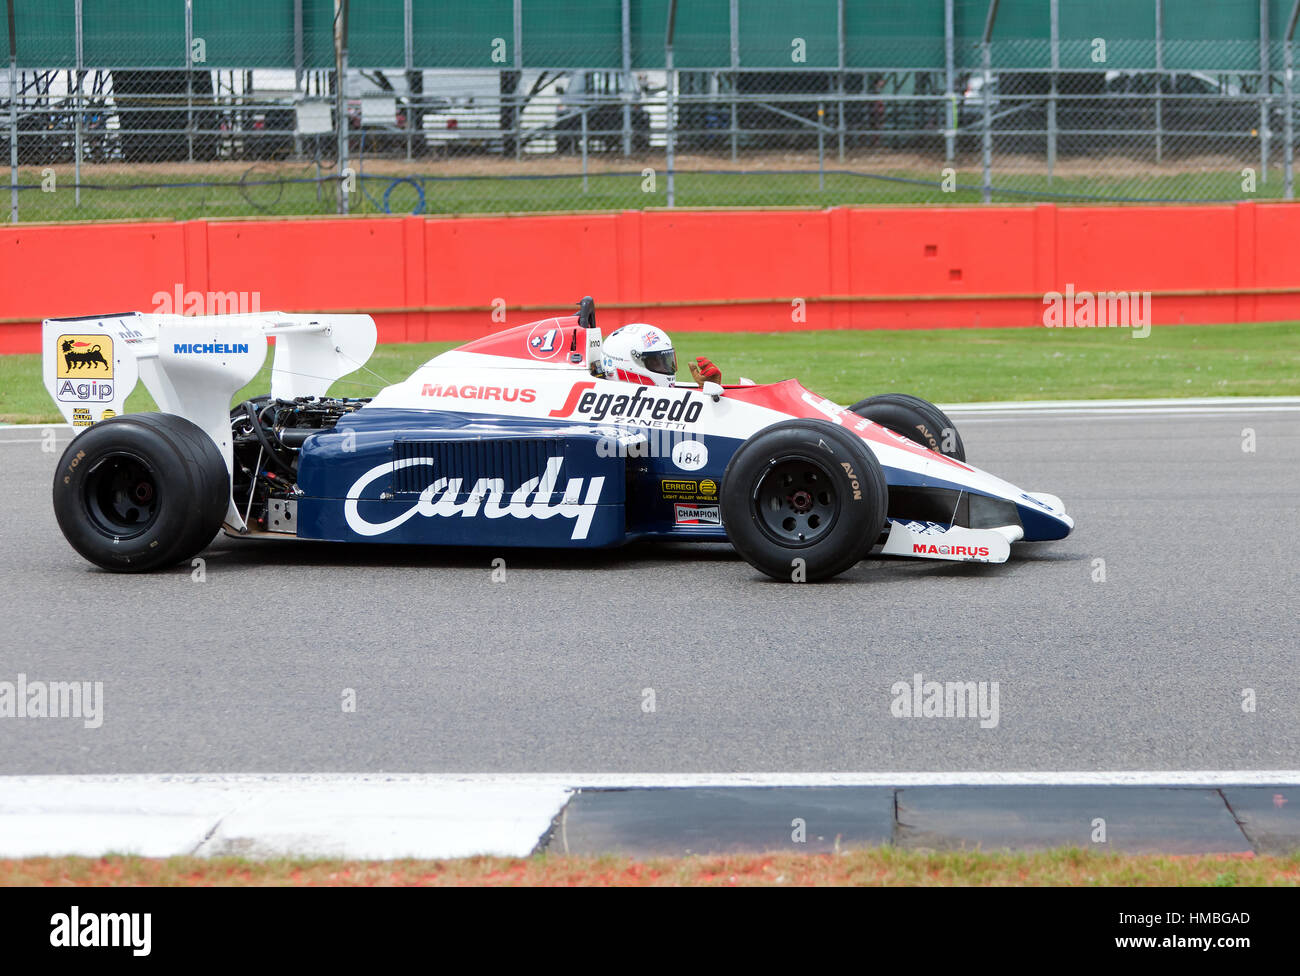 F1 1984 High Resolution Stock Photography And Images Alamy